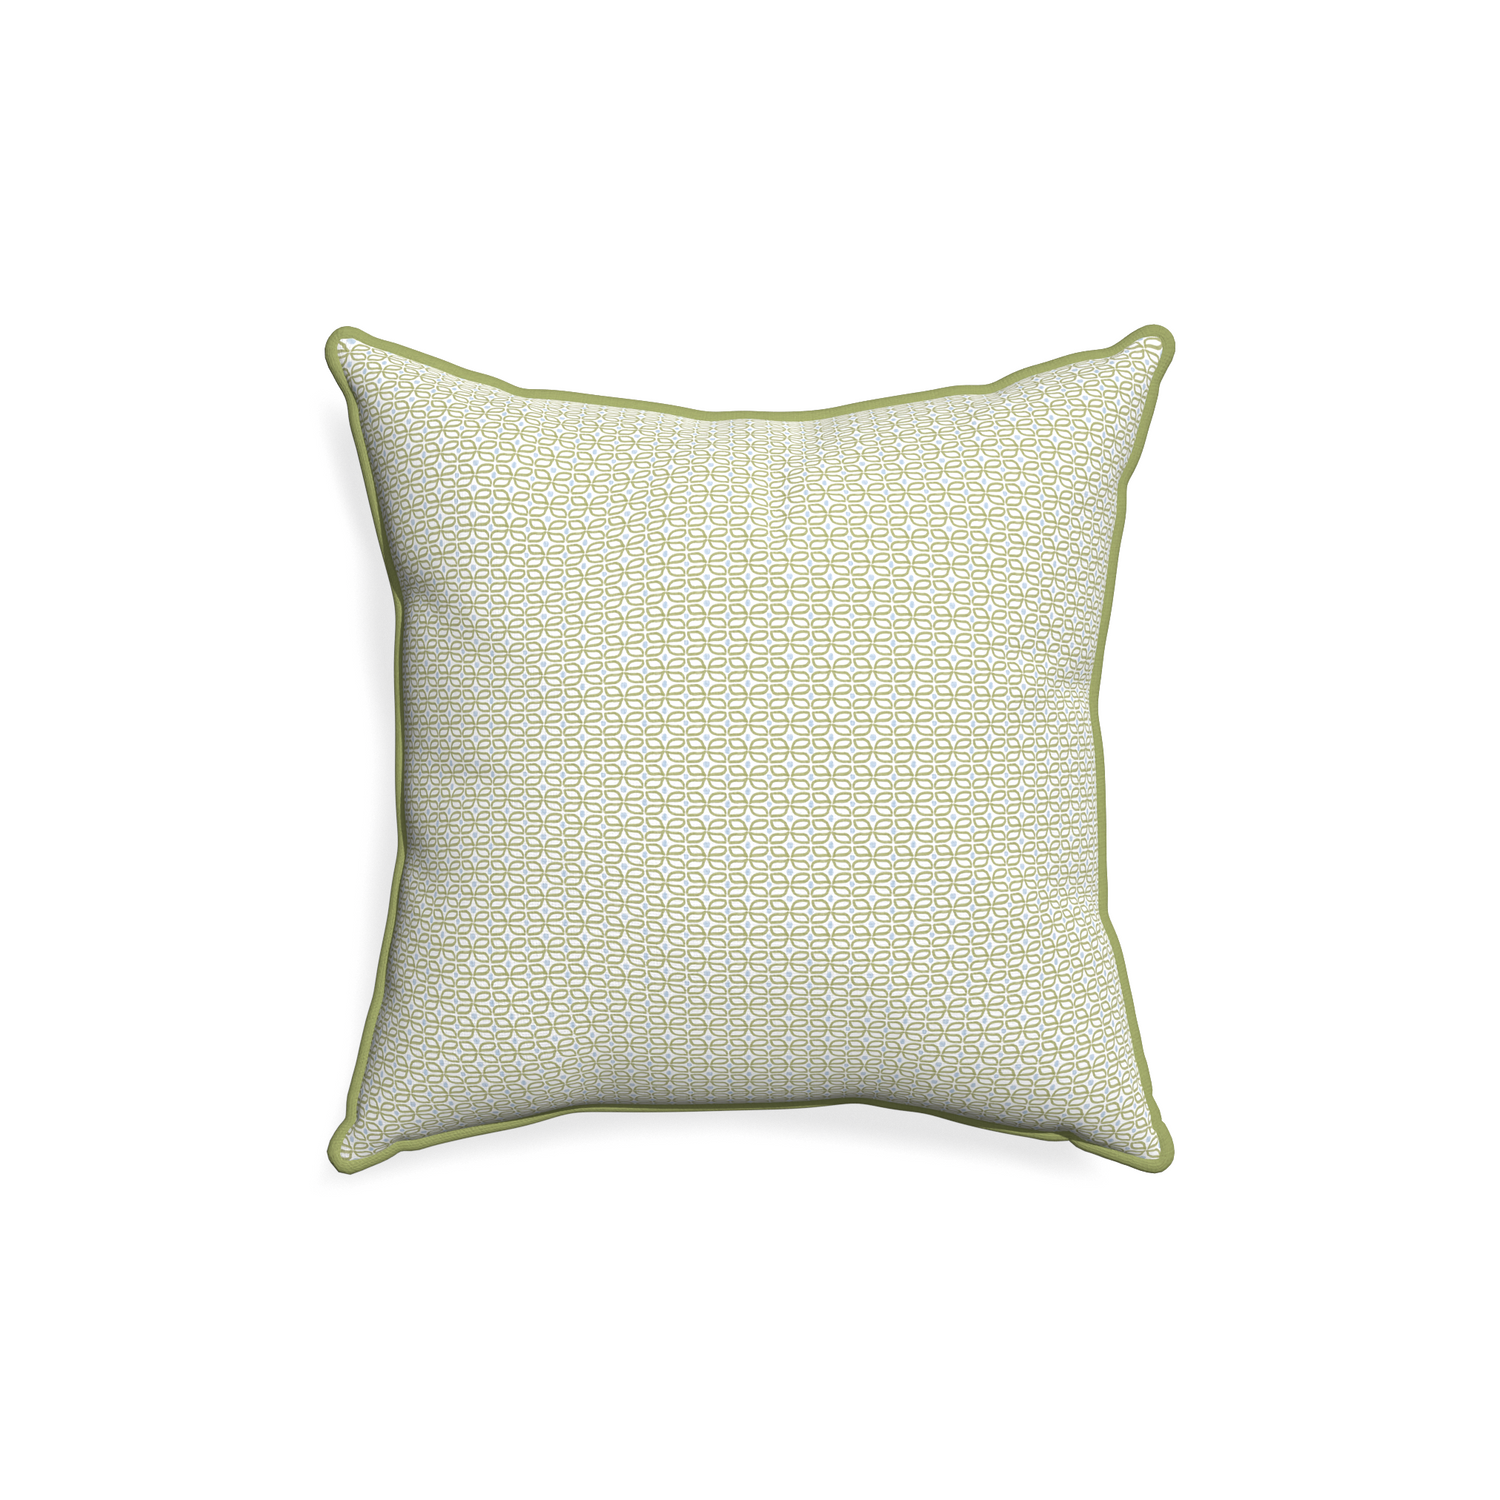 18-square loomi moss custom pillow with moss piping on white background